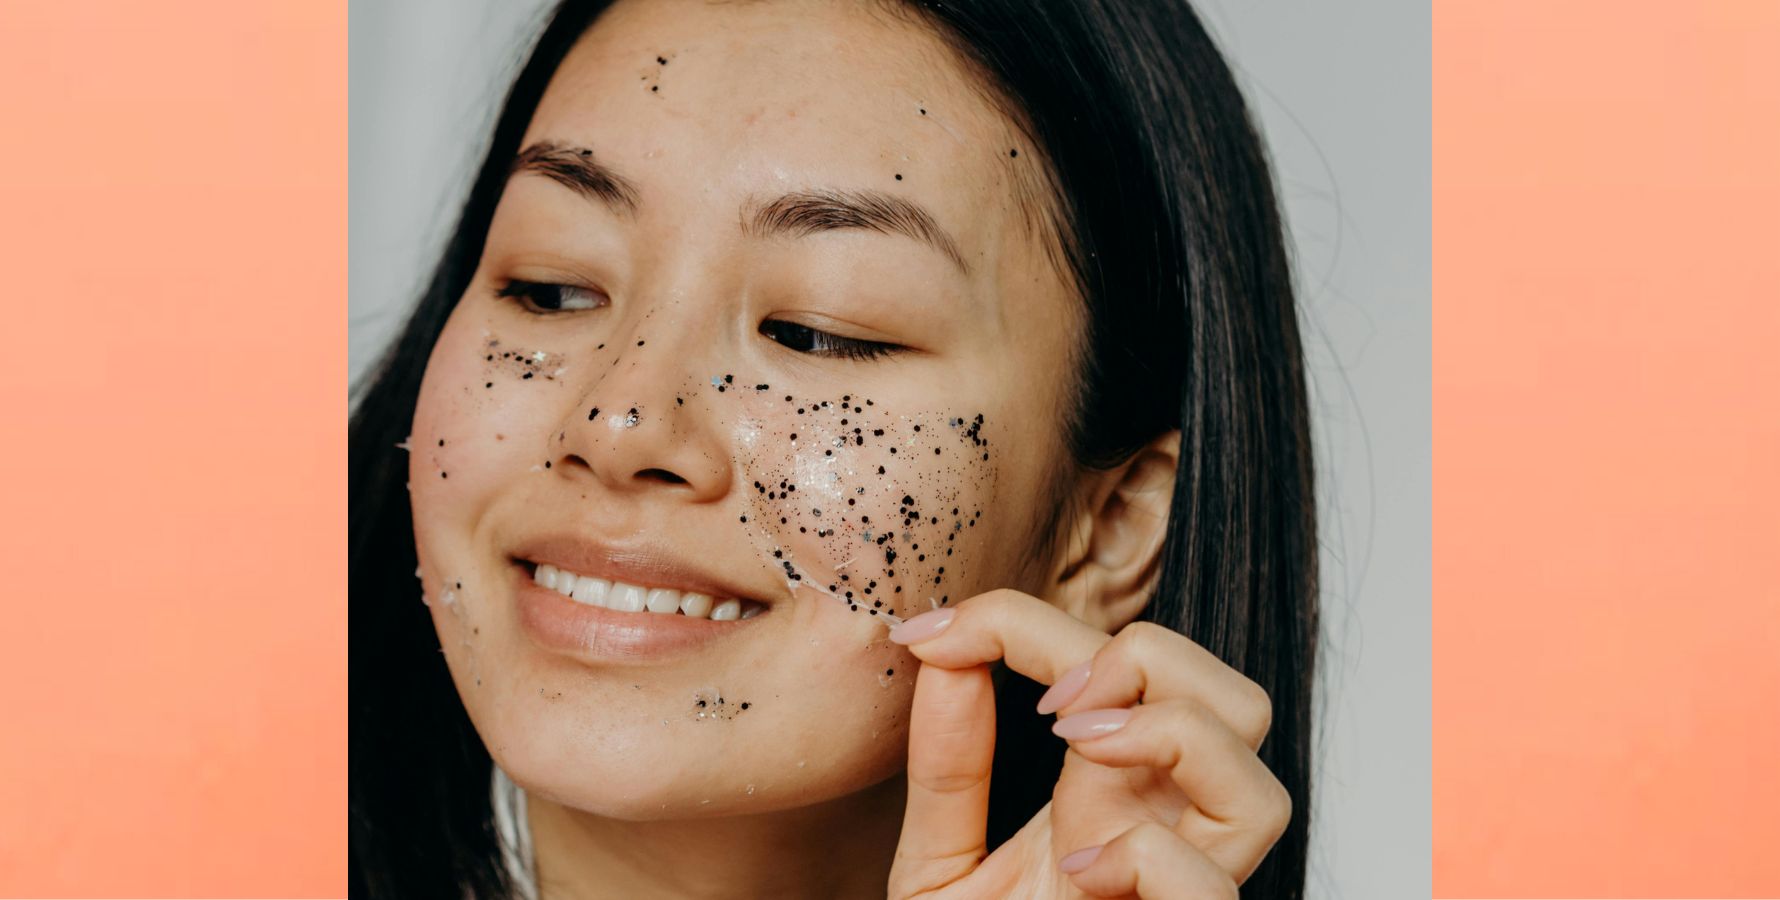 CERM SKIN Acne unmasked: A guide to acne types and action Image: Pexels.com/Polina Kovaleva